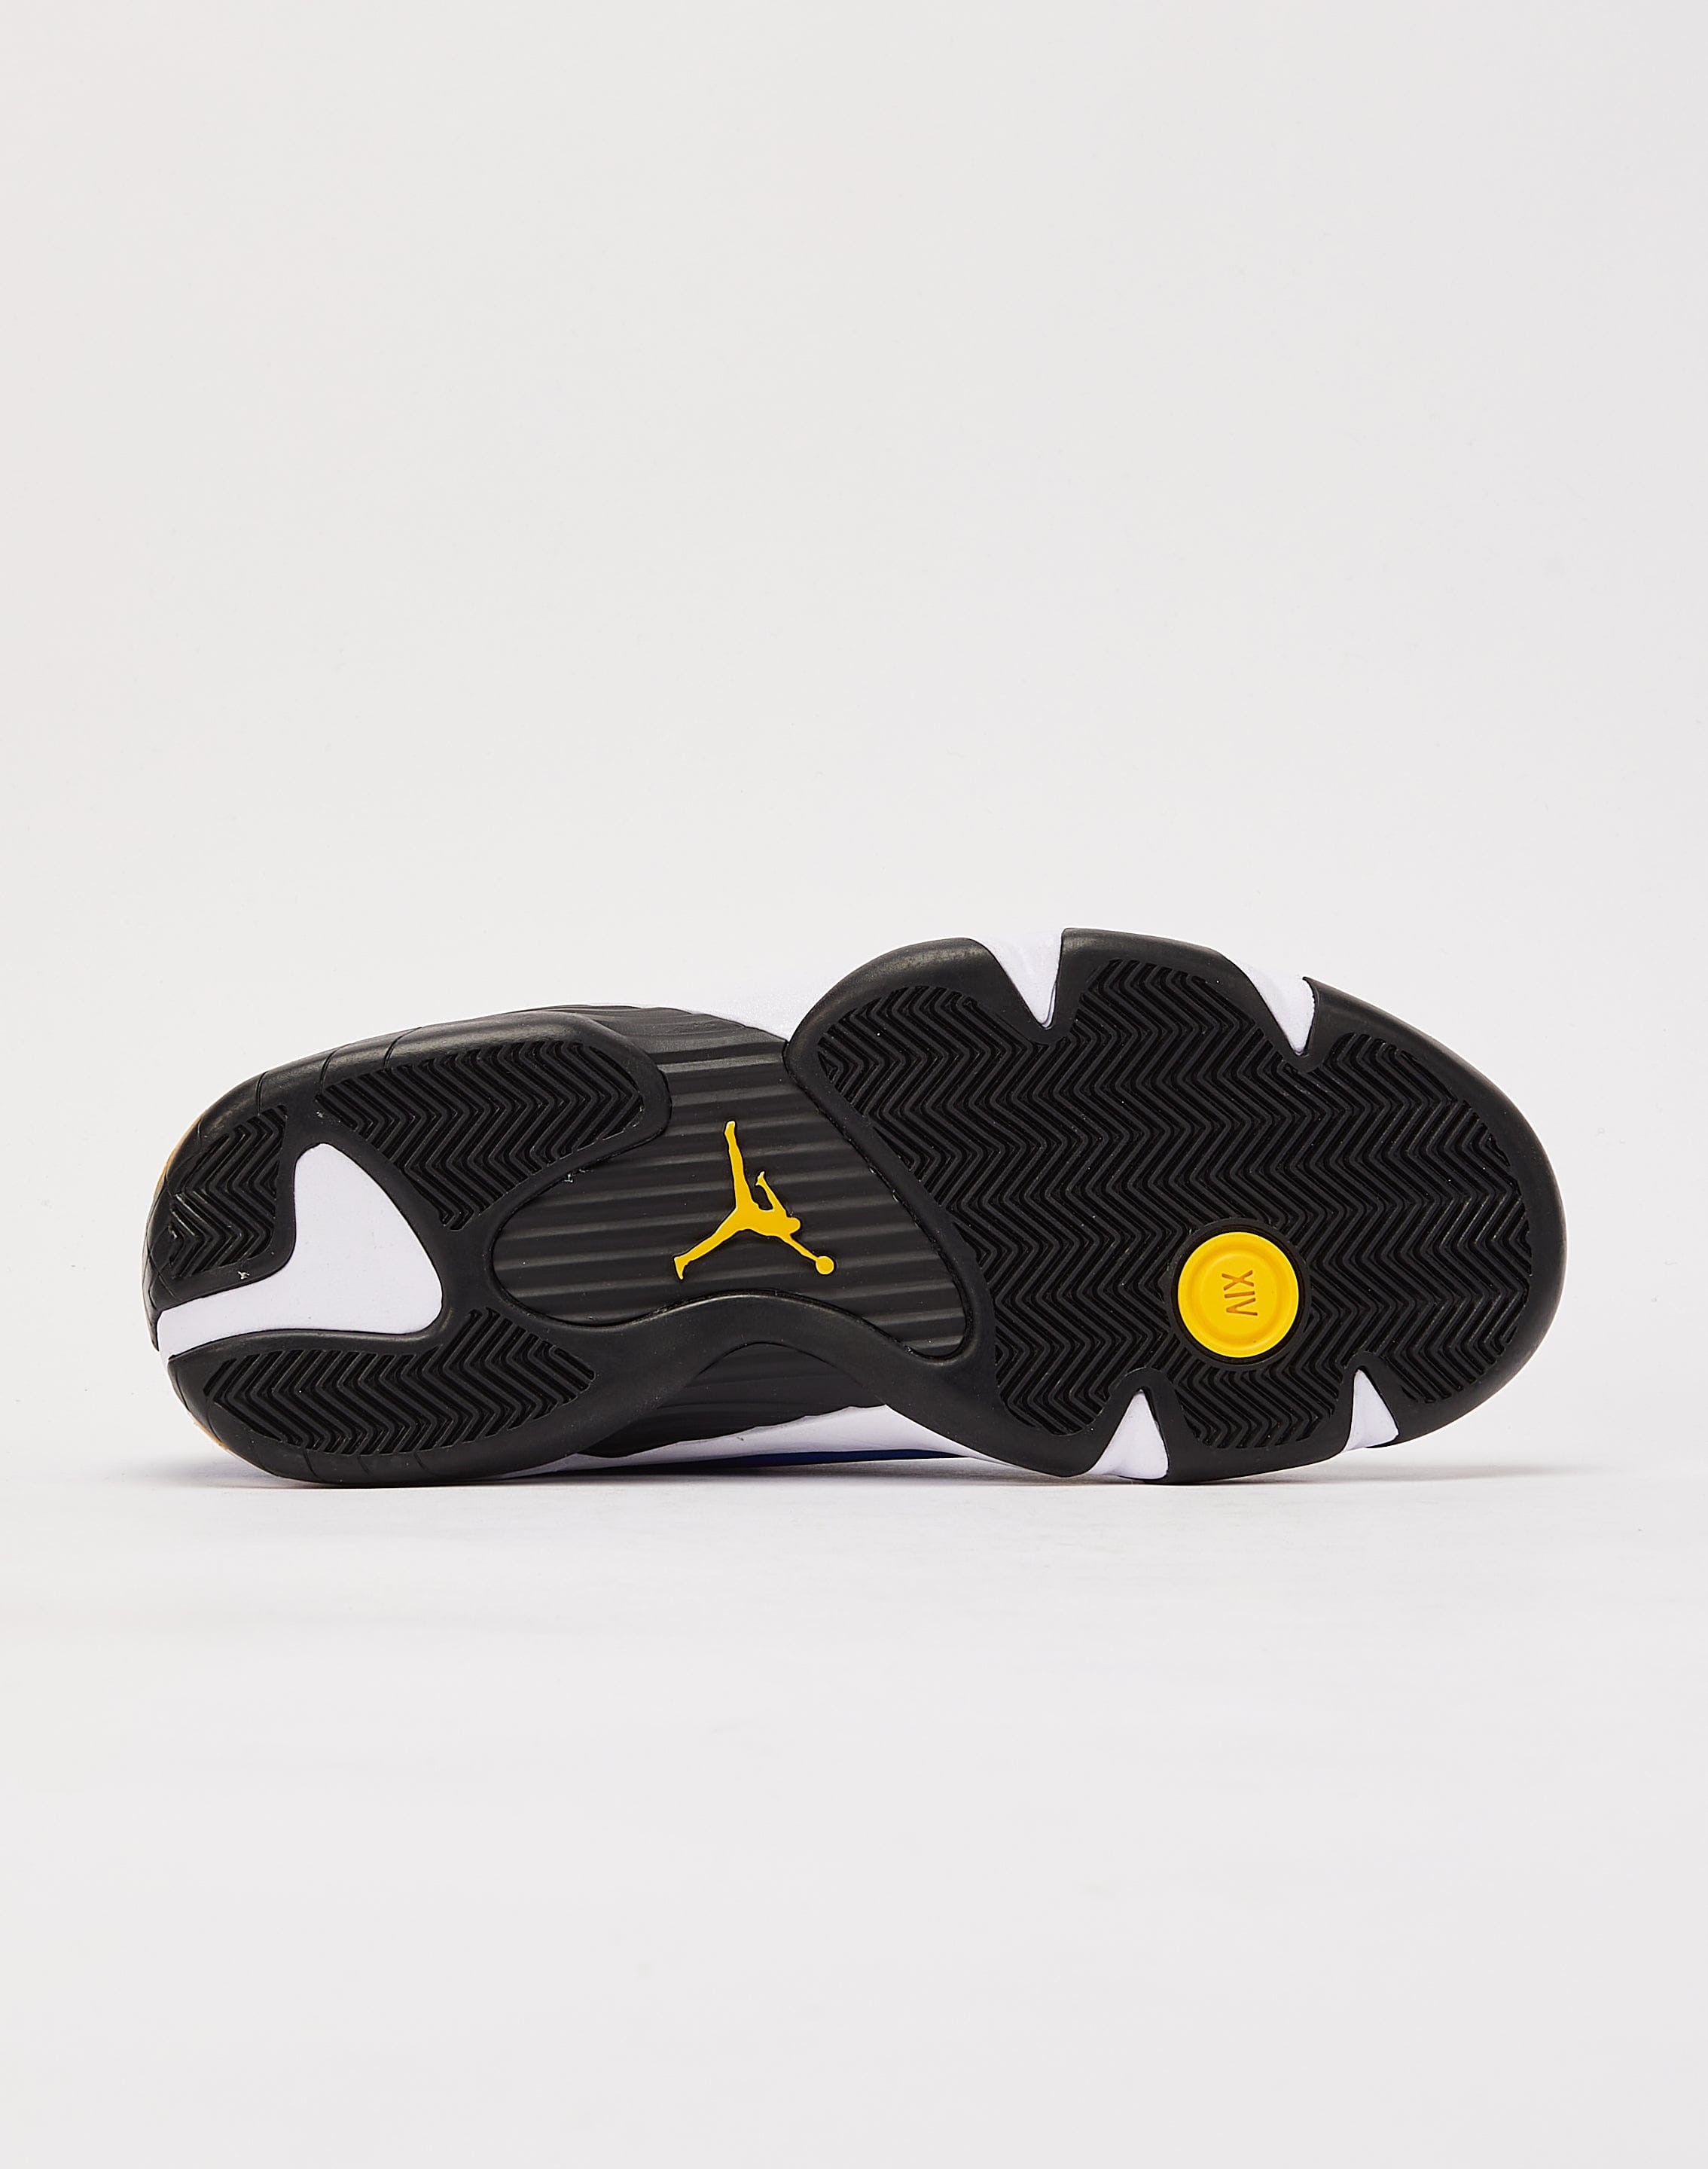 FIRST LOOK: AIR JORDAN 14 LANEY EARLY REVIEW 